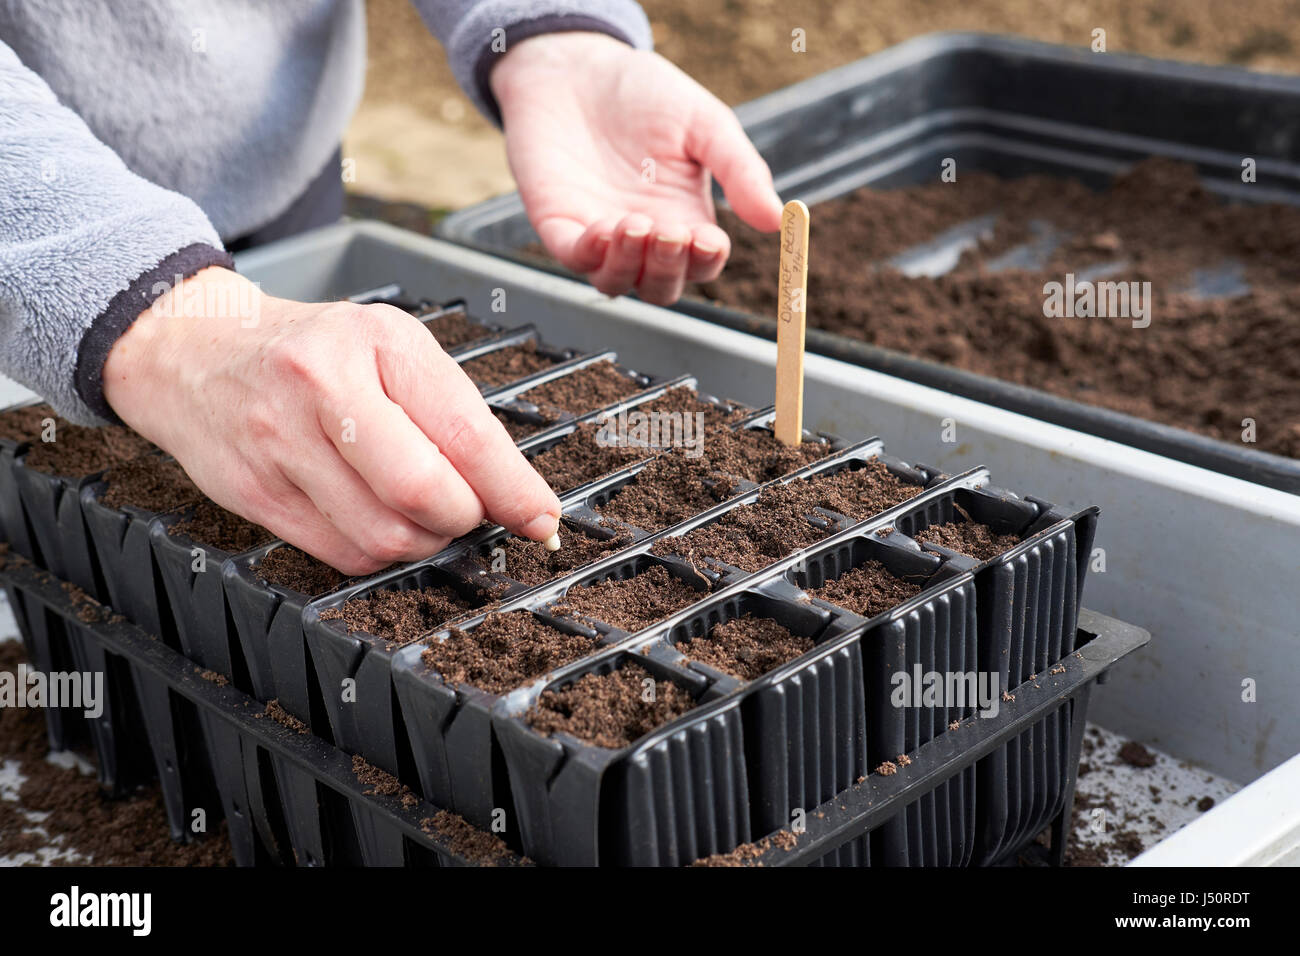 Woman sowing dwarf bean seeds in compost filled plug plant pots at a garden potting bench, UK. Stock Photo